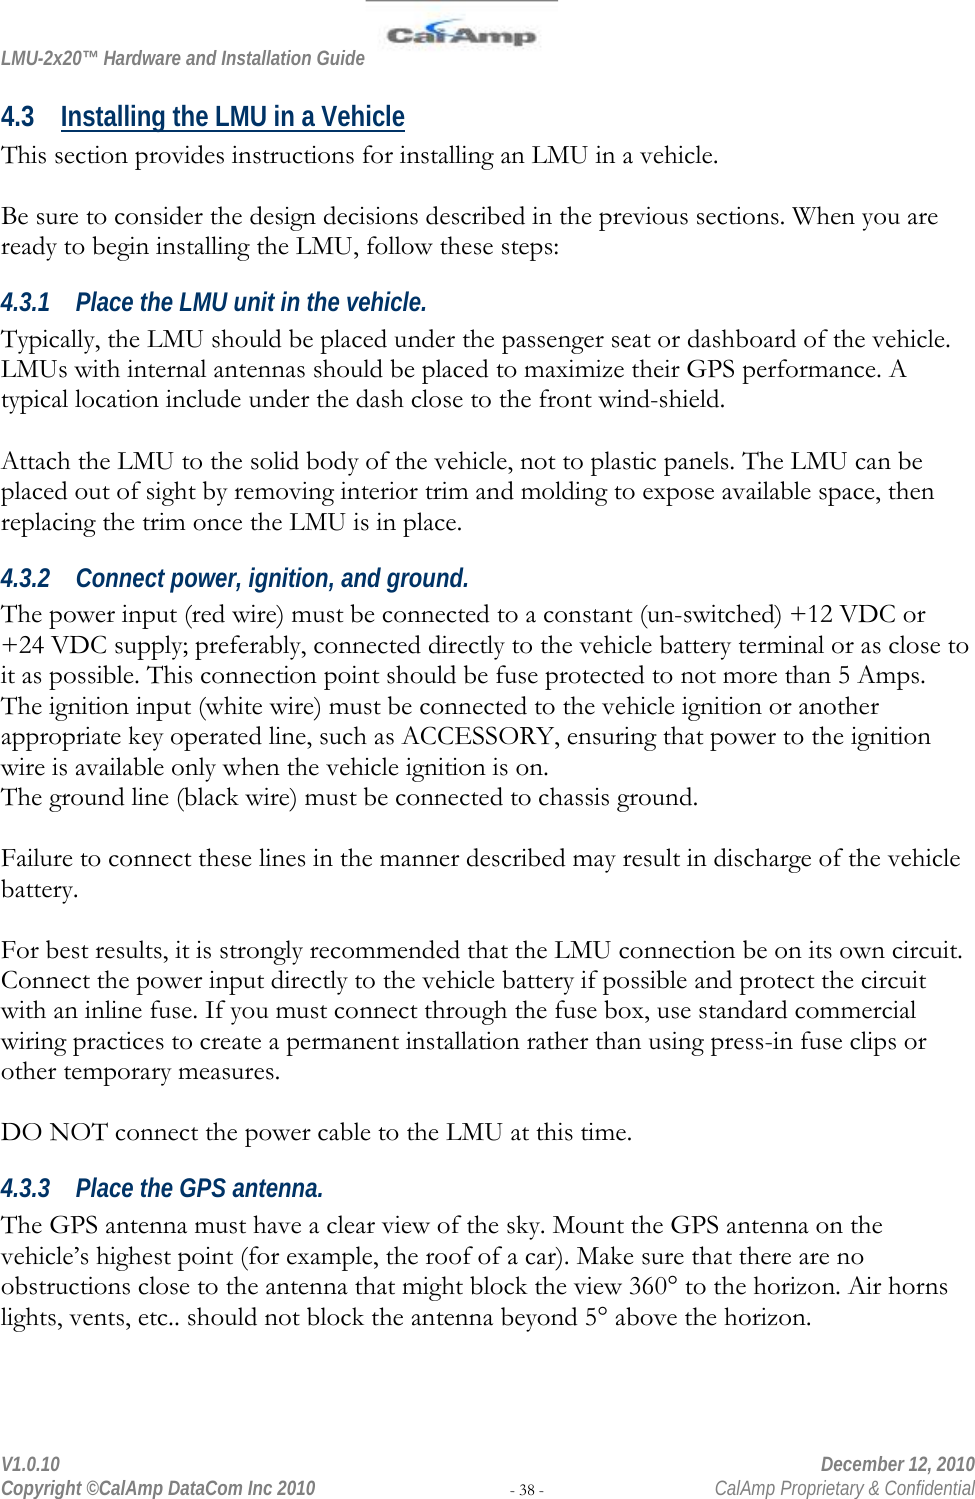 LMU-2x20™ Hardware and Installation Guide  V1.0.10    December 12, 2010 Copyright ©CalAmp DataCom Inc 2010 - 38 -  CalAmp Proprietary &amp; Confidential 4.3 Installing the LMU in a Vehicle This section provides instructions for installing an LMU in a vehicle.   Be sure to consider the design decisions described in the previous sections. When you are ready to begin installing the LMU, follow these steps: 4.3.1 Place the LMU unit in the vehicle. Typically, the LMU should be placed under the passenger seat or dashboard of the vehicle. LMUs with internal antennas should be placed to maximize their GPS performance. A typical location include under the dash close to the front wind-shield.  Attach the LMU to the solid body of the vehicle, not to plastic panels. The LMU can be placed out of sight by removing interior trim and molding to expose available space, then replacing the trim once the LMU is in place.  4.3.2 Connect power, ignition, and ground. The power input (red wire) must be connected to a constant (un-switched) +12 VDC or +24 VDC supply; preferably, connected directly to the vehicle battery terminal or as close to it as possible. This connection point should be fuse protected to not more than 5 Amps. The ignition input (white wire) must be connected to the vehicle ignition or another appropriate key operated line, such as ACCESSORY, ensuring that power to the ignition wire is available only when the vehicle ignition is on.  The ground line (black wire) must be connected to chassis ground.   Failure to connect these lines in the manner described may result in discharge of the vehicle battery.  For best results, it is strongly recommended that the LMU connection be on its own circuit. Connect the power input directly to the vehicle battery if possible and protect the circuit with an inline fuse. If you must connect through the fuse box, use standard commercial wiring practices to create a permanent installation rather than using press-in fuse clips or other temporary measures.  DO NOT connect the power cable to the LMU at this time. 4.3.3 Place the GPS antenna. The GPS antenna must have a clear view of the sky. Mount the GPS antenna on the vehicle’s highest point (for example, the roof of a car). Make sure that there are no obstructions close to the antenna that might block the view 360° to the horizon. Air horns lights, vents, etc.. should not block the antenna beyond 5° above the horizon.   